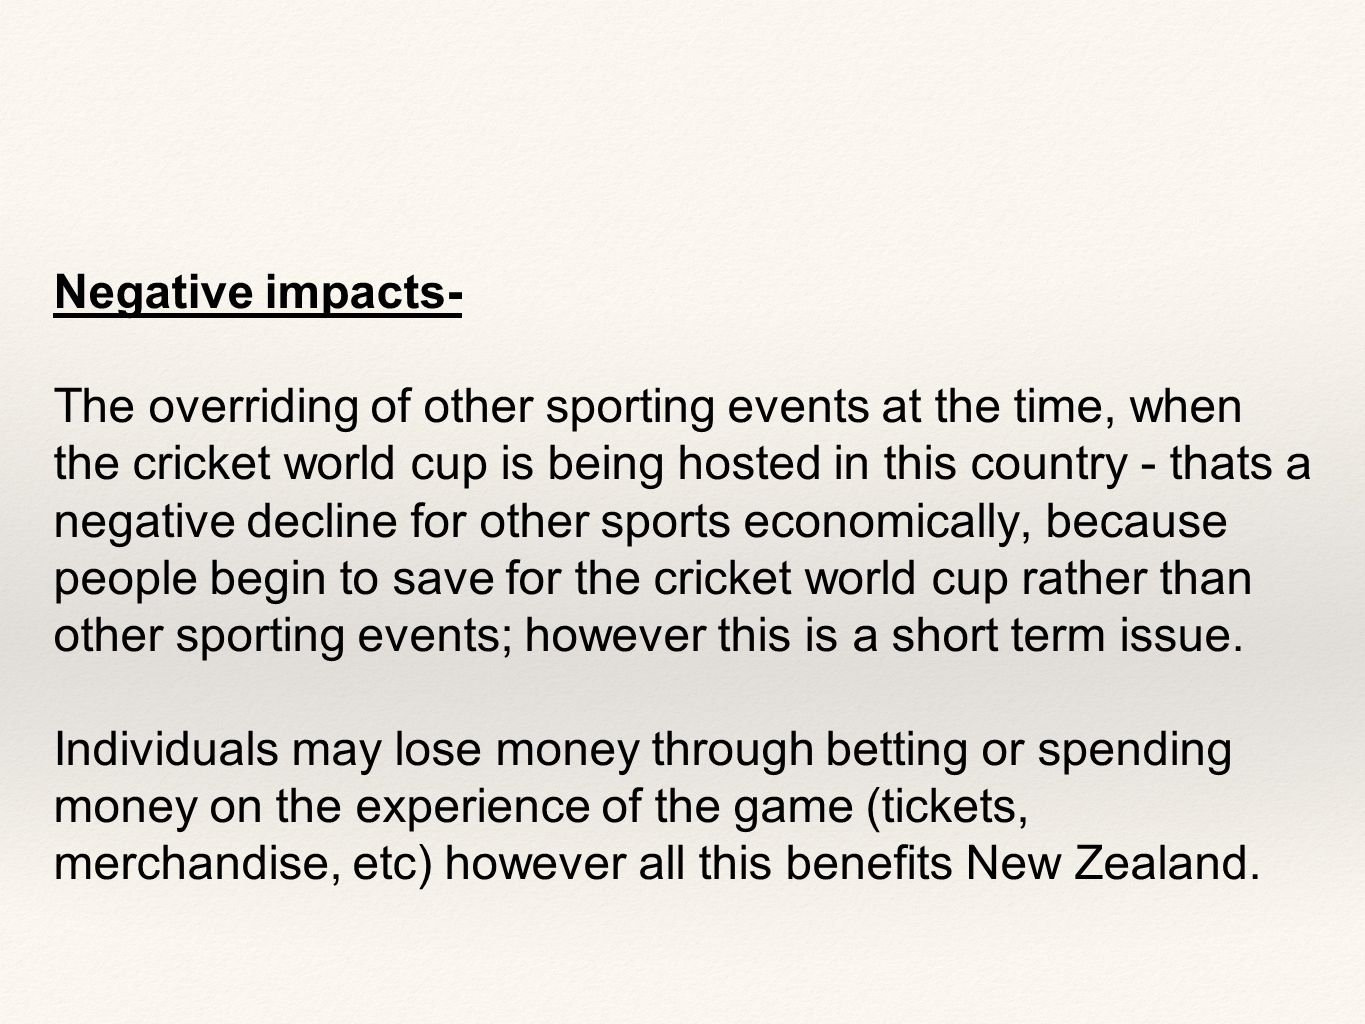 Negative impacts- The overriding of other sporting events at the time, when the cricket world cup is being hosted in this country - thats a negative decline for other sports economically, because people begin to save for the cricket world cup rather than other sporting events; however this is a short term issue.